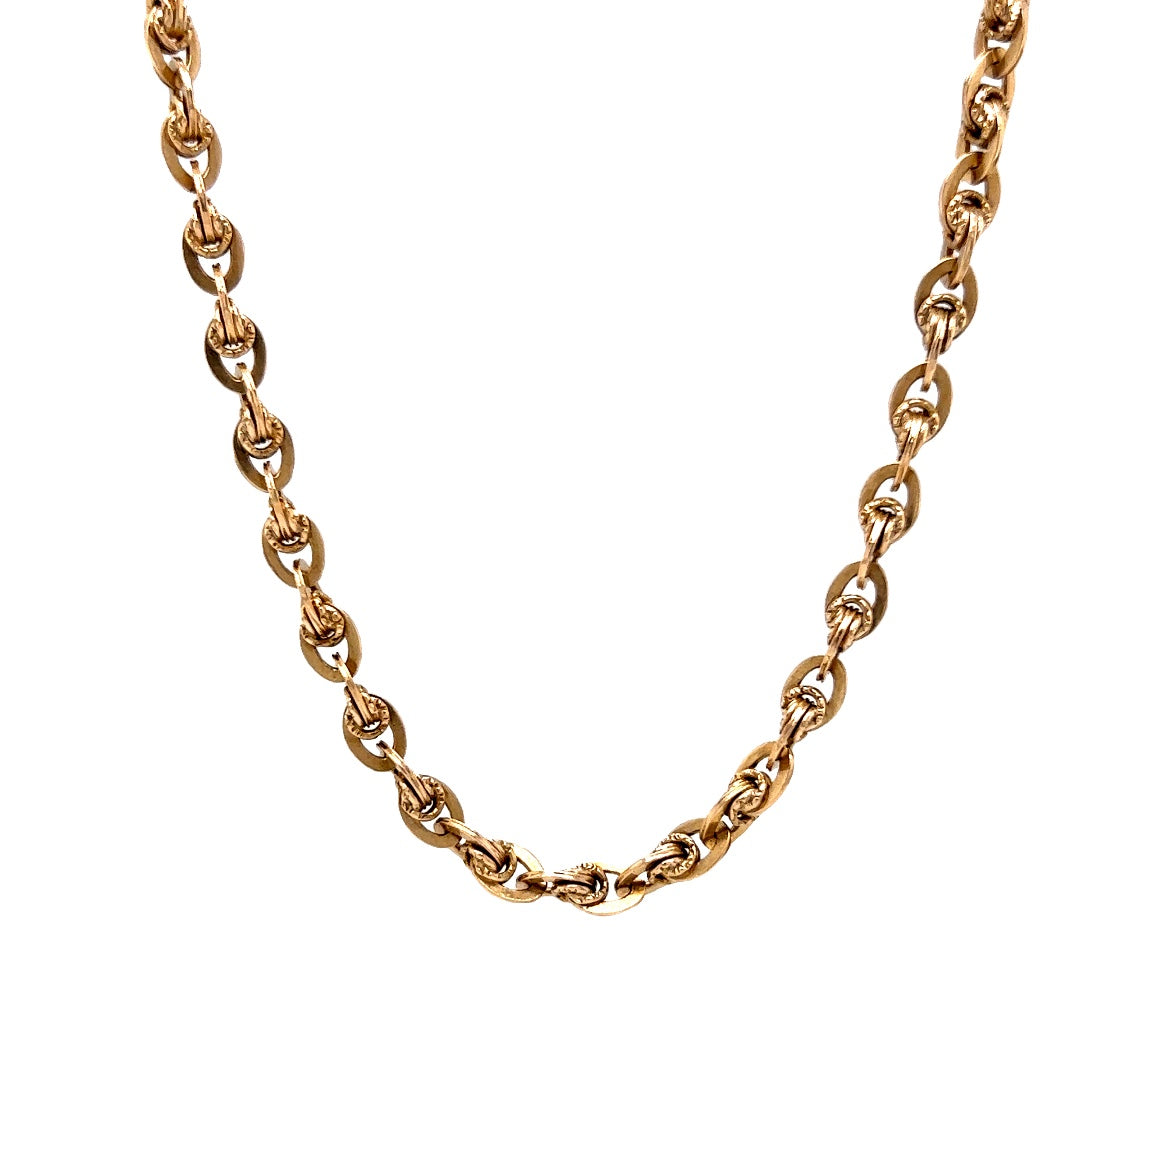 10K or 14K Gold Box Chain Necklace - All Sizes | eBay